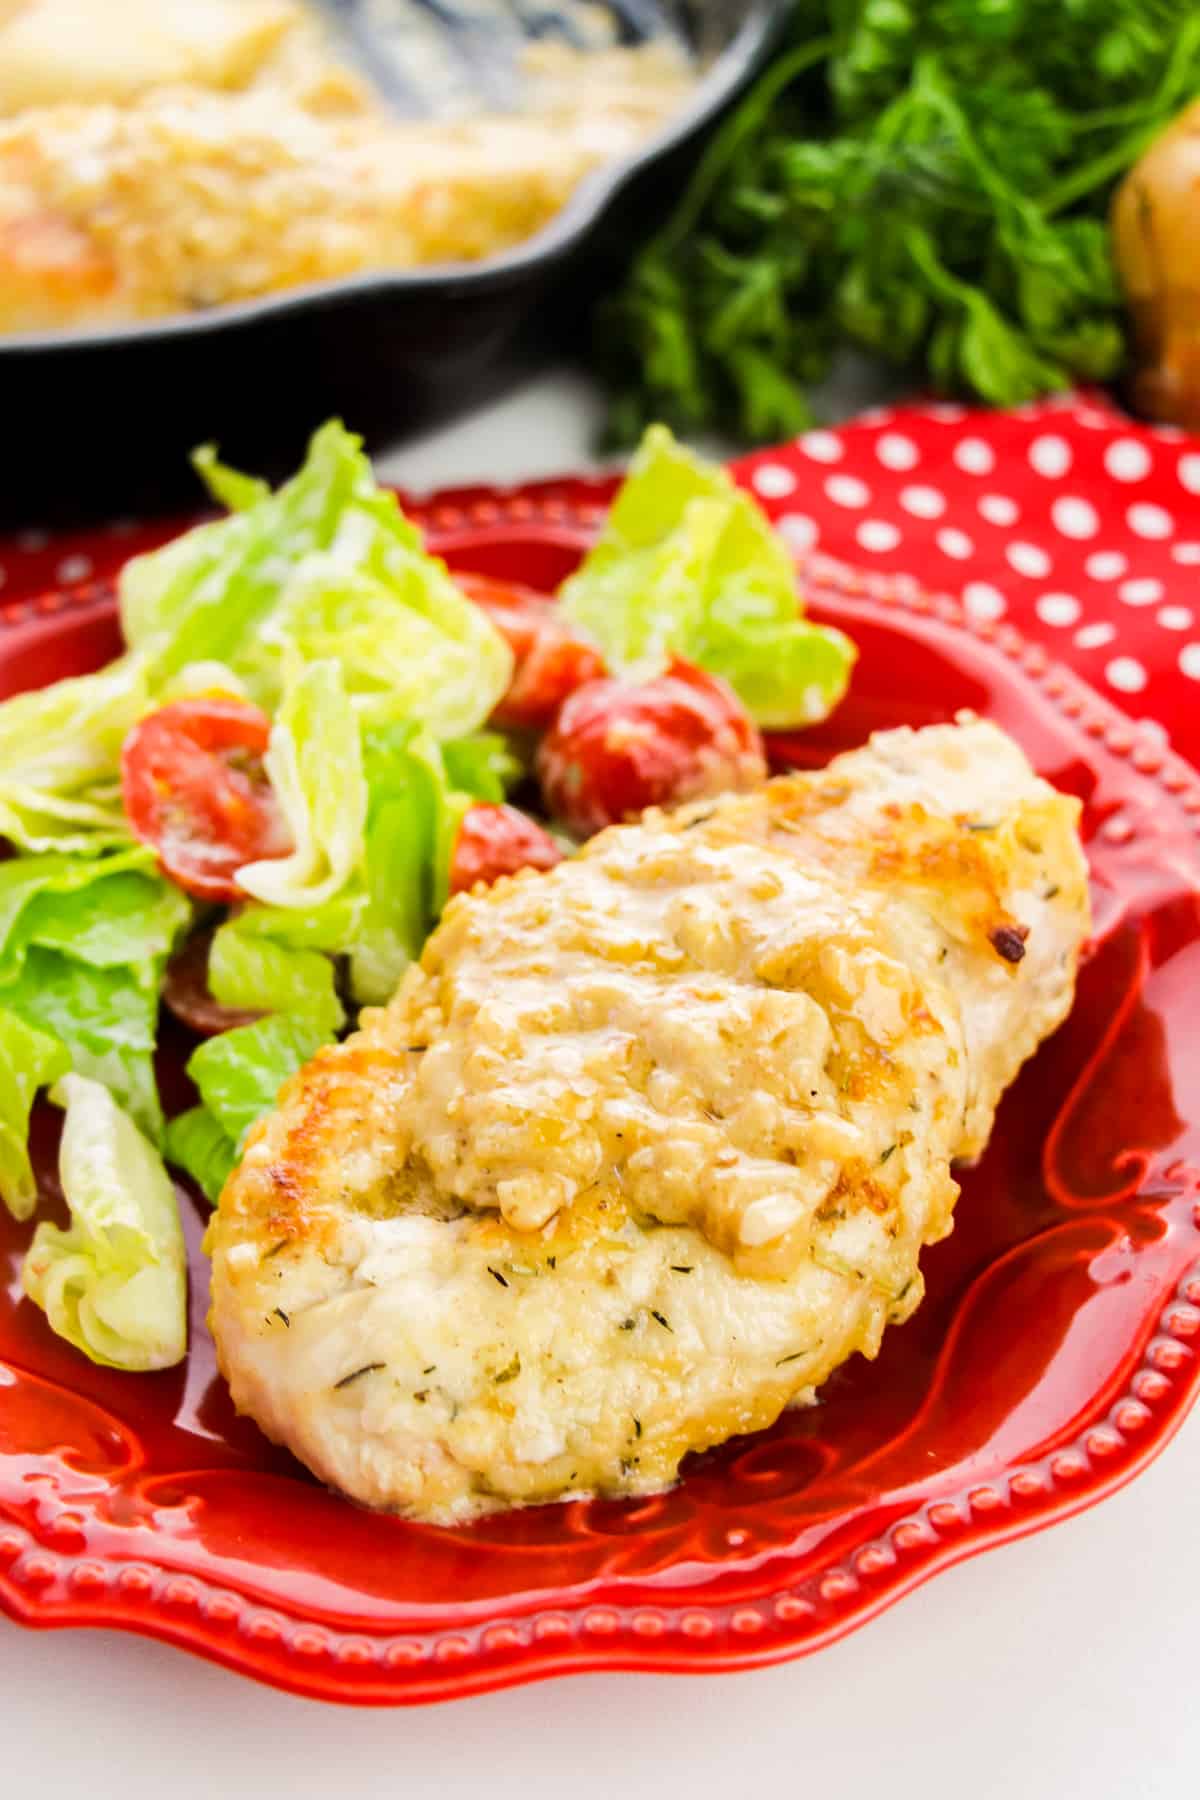 Smothered Chicken Breast served with salad on a red plate.